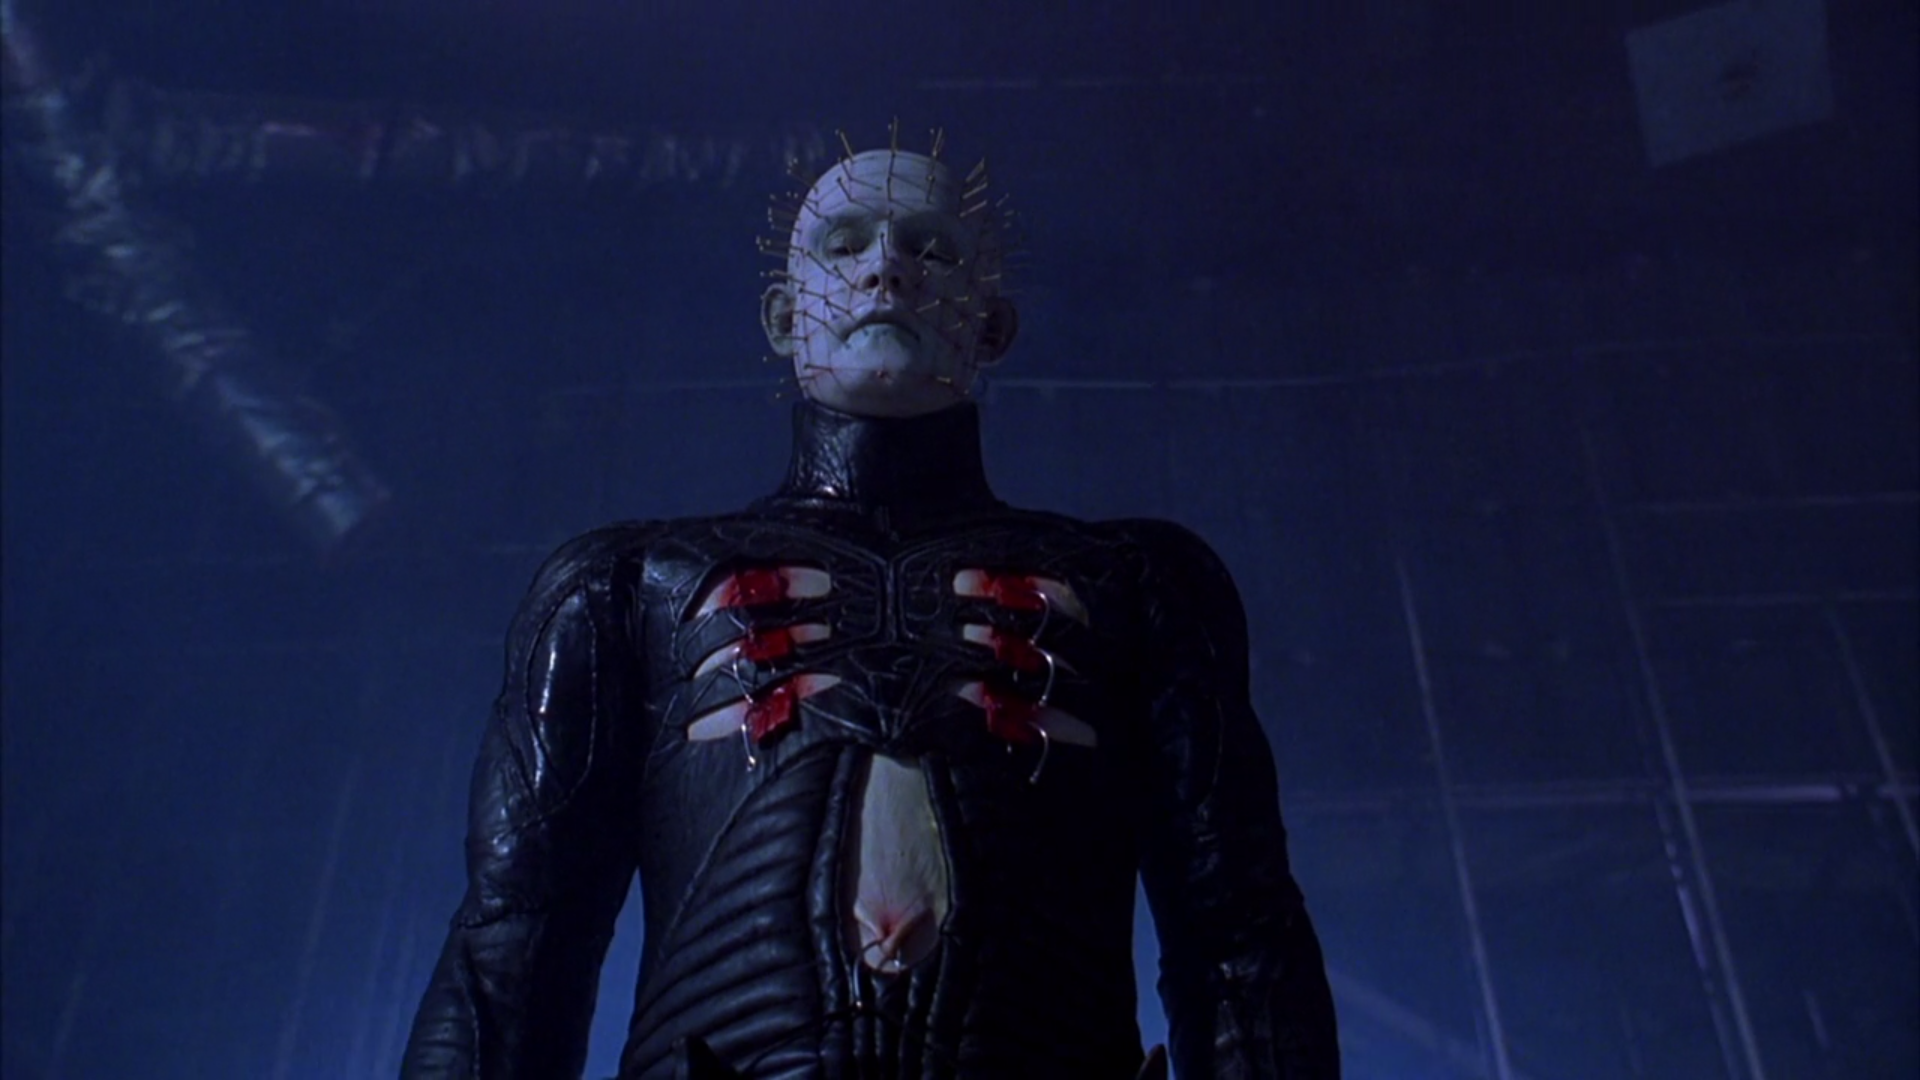 Pinhead, a demon wearing all-leather and with pins sticking out of his face and skull, looms above the camera, looking down.